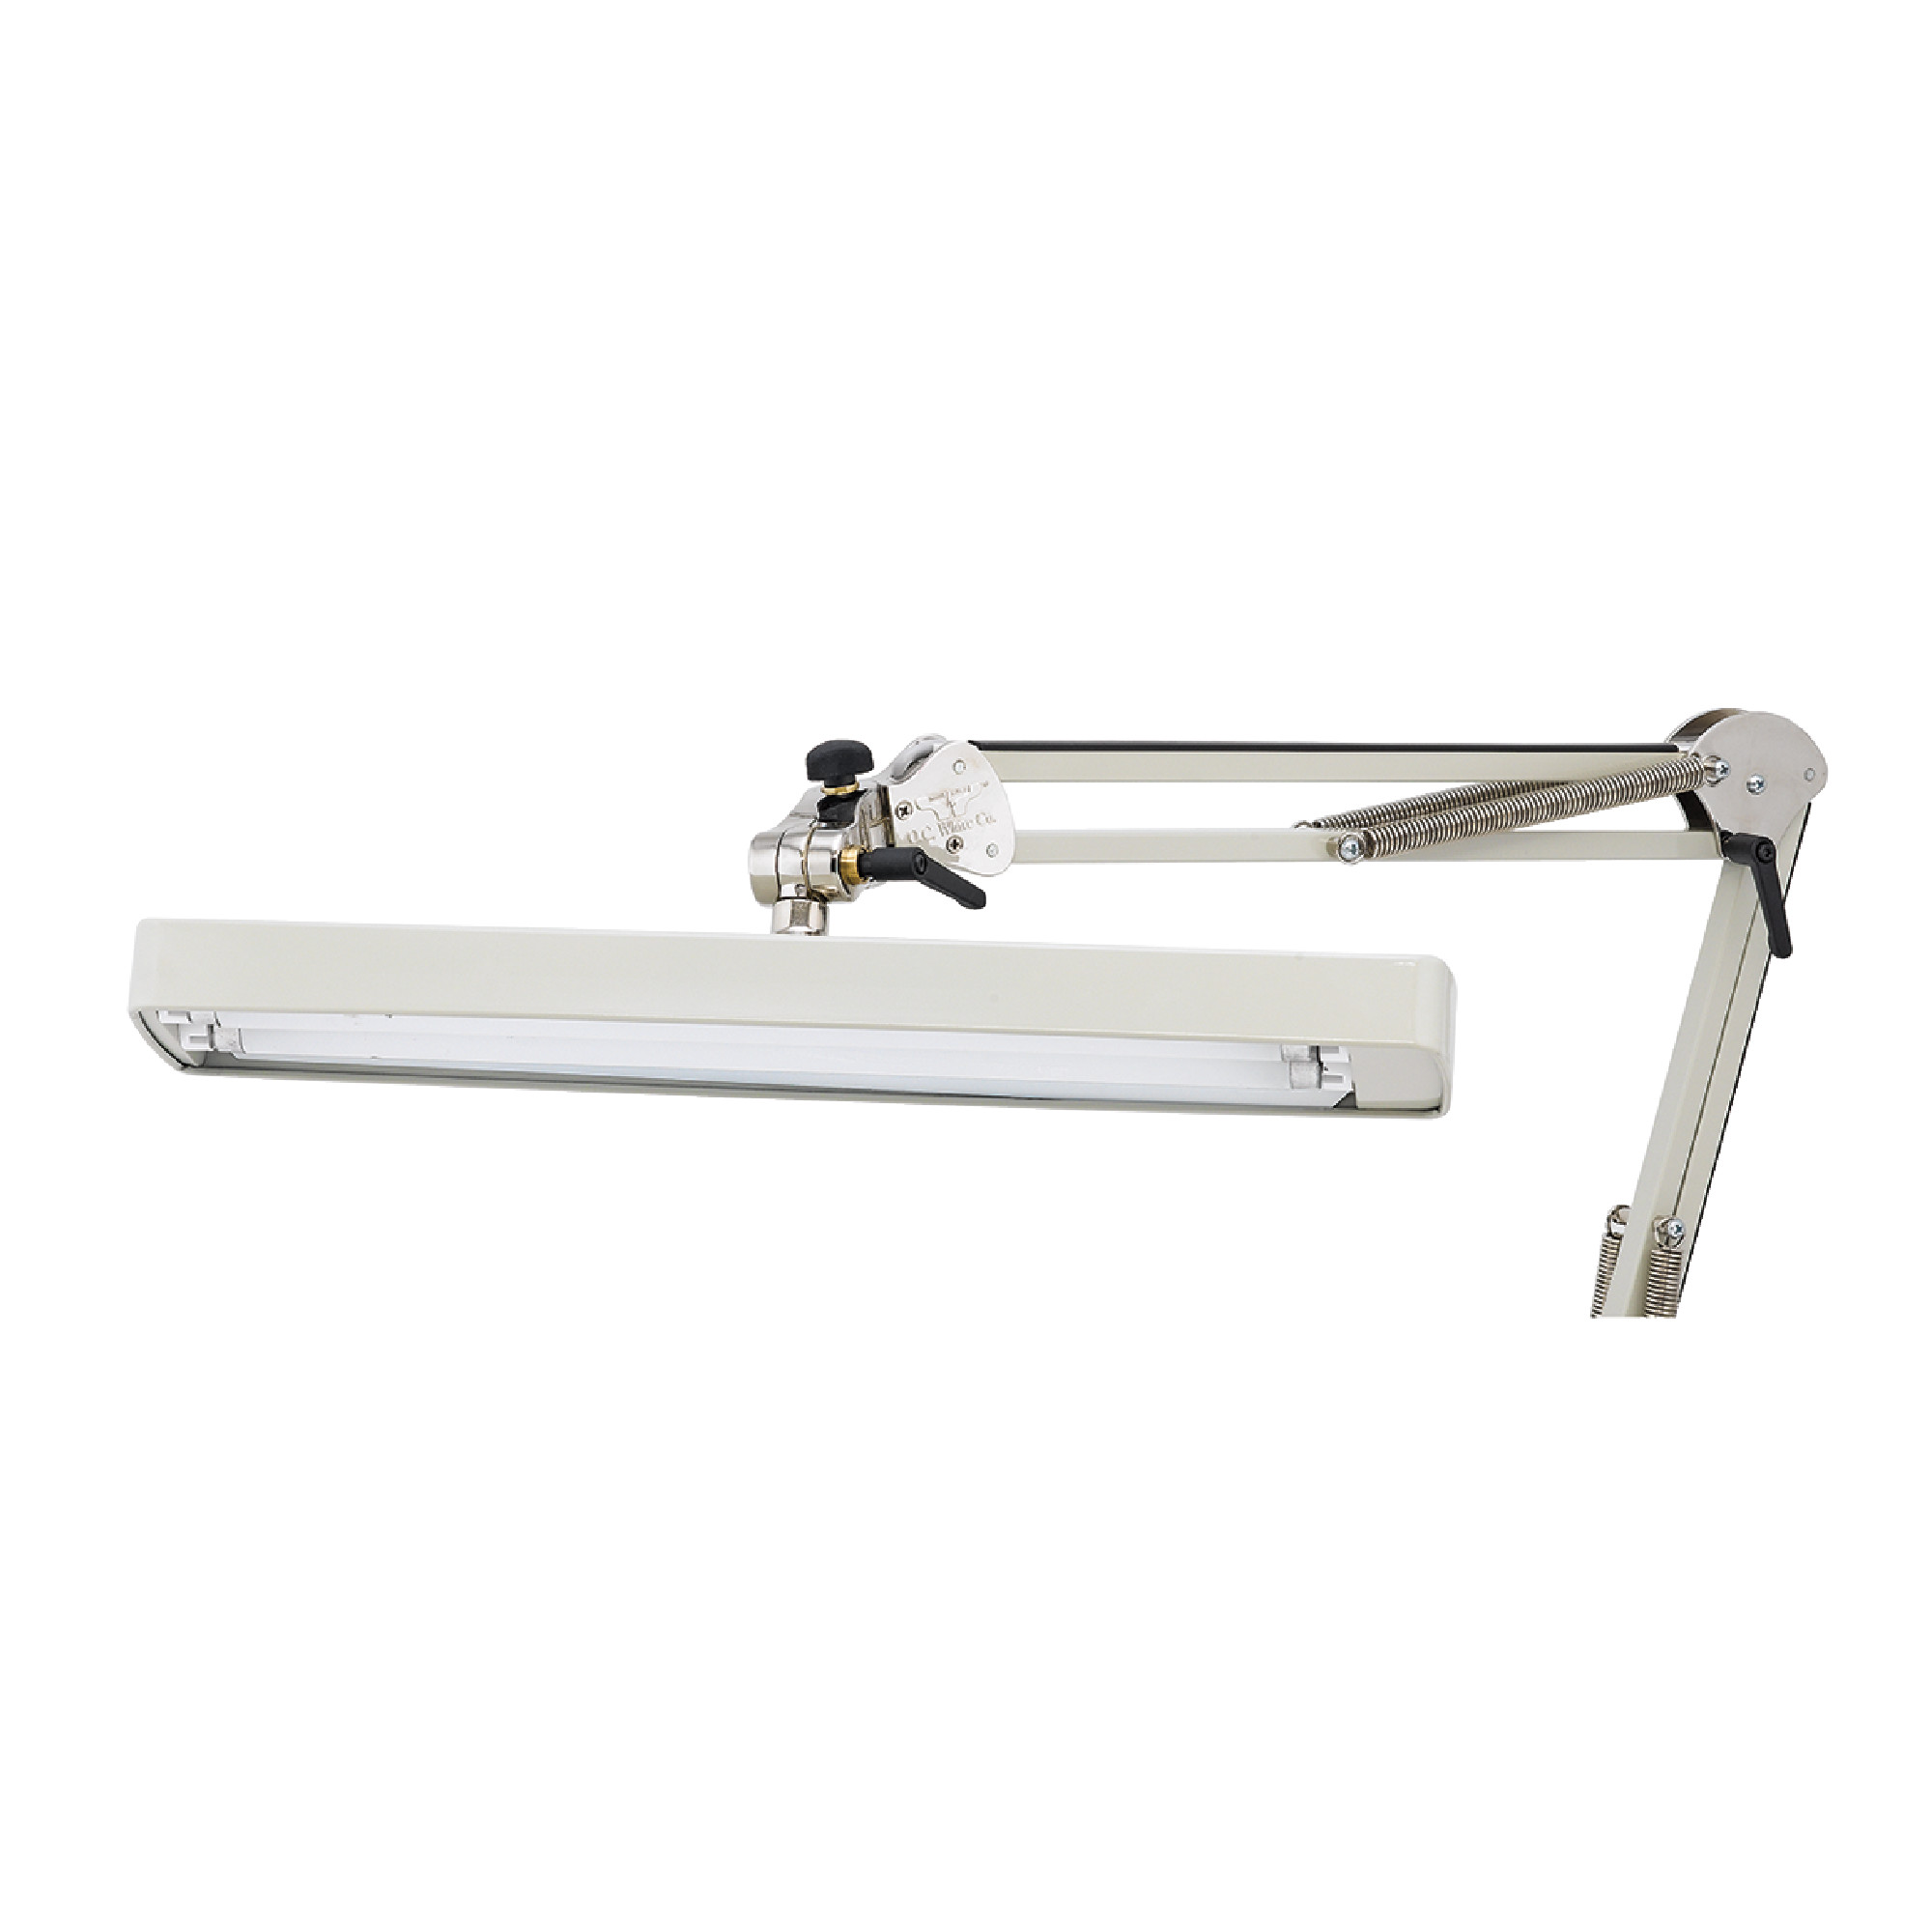 Heavy Duty Longline Draftsman Lamp with Table Edge Clamp